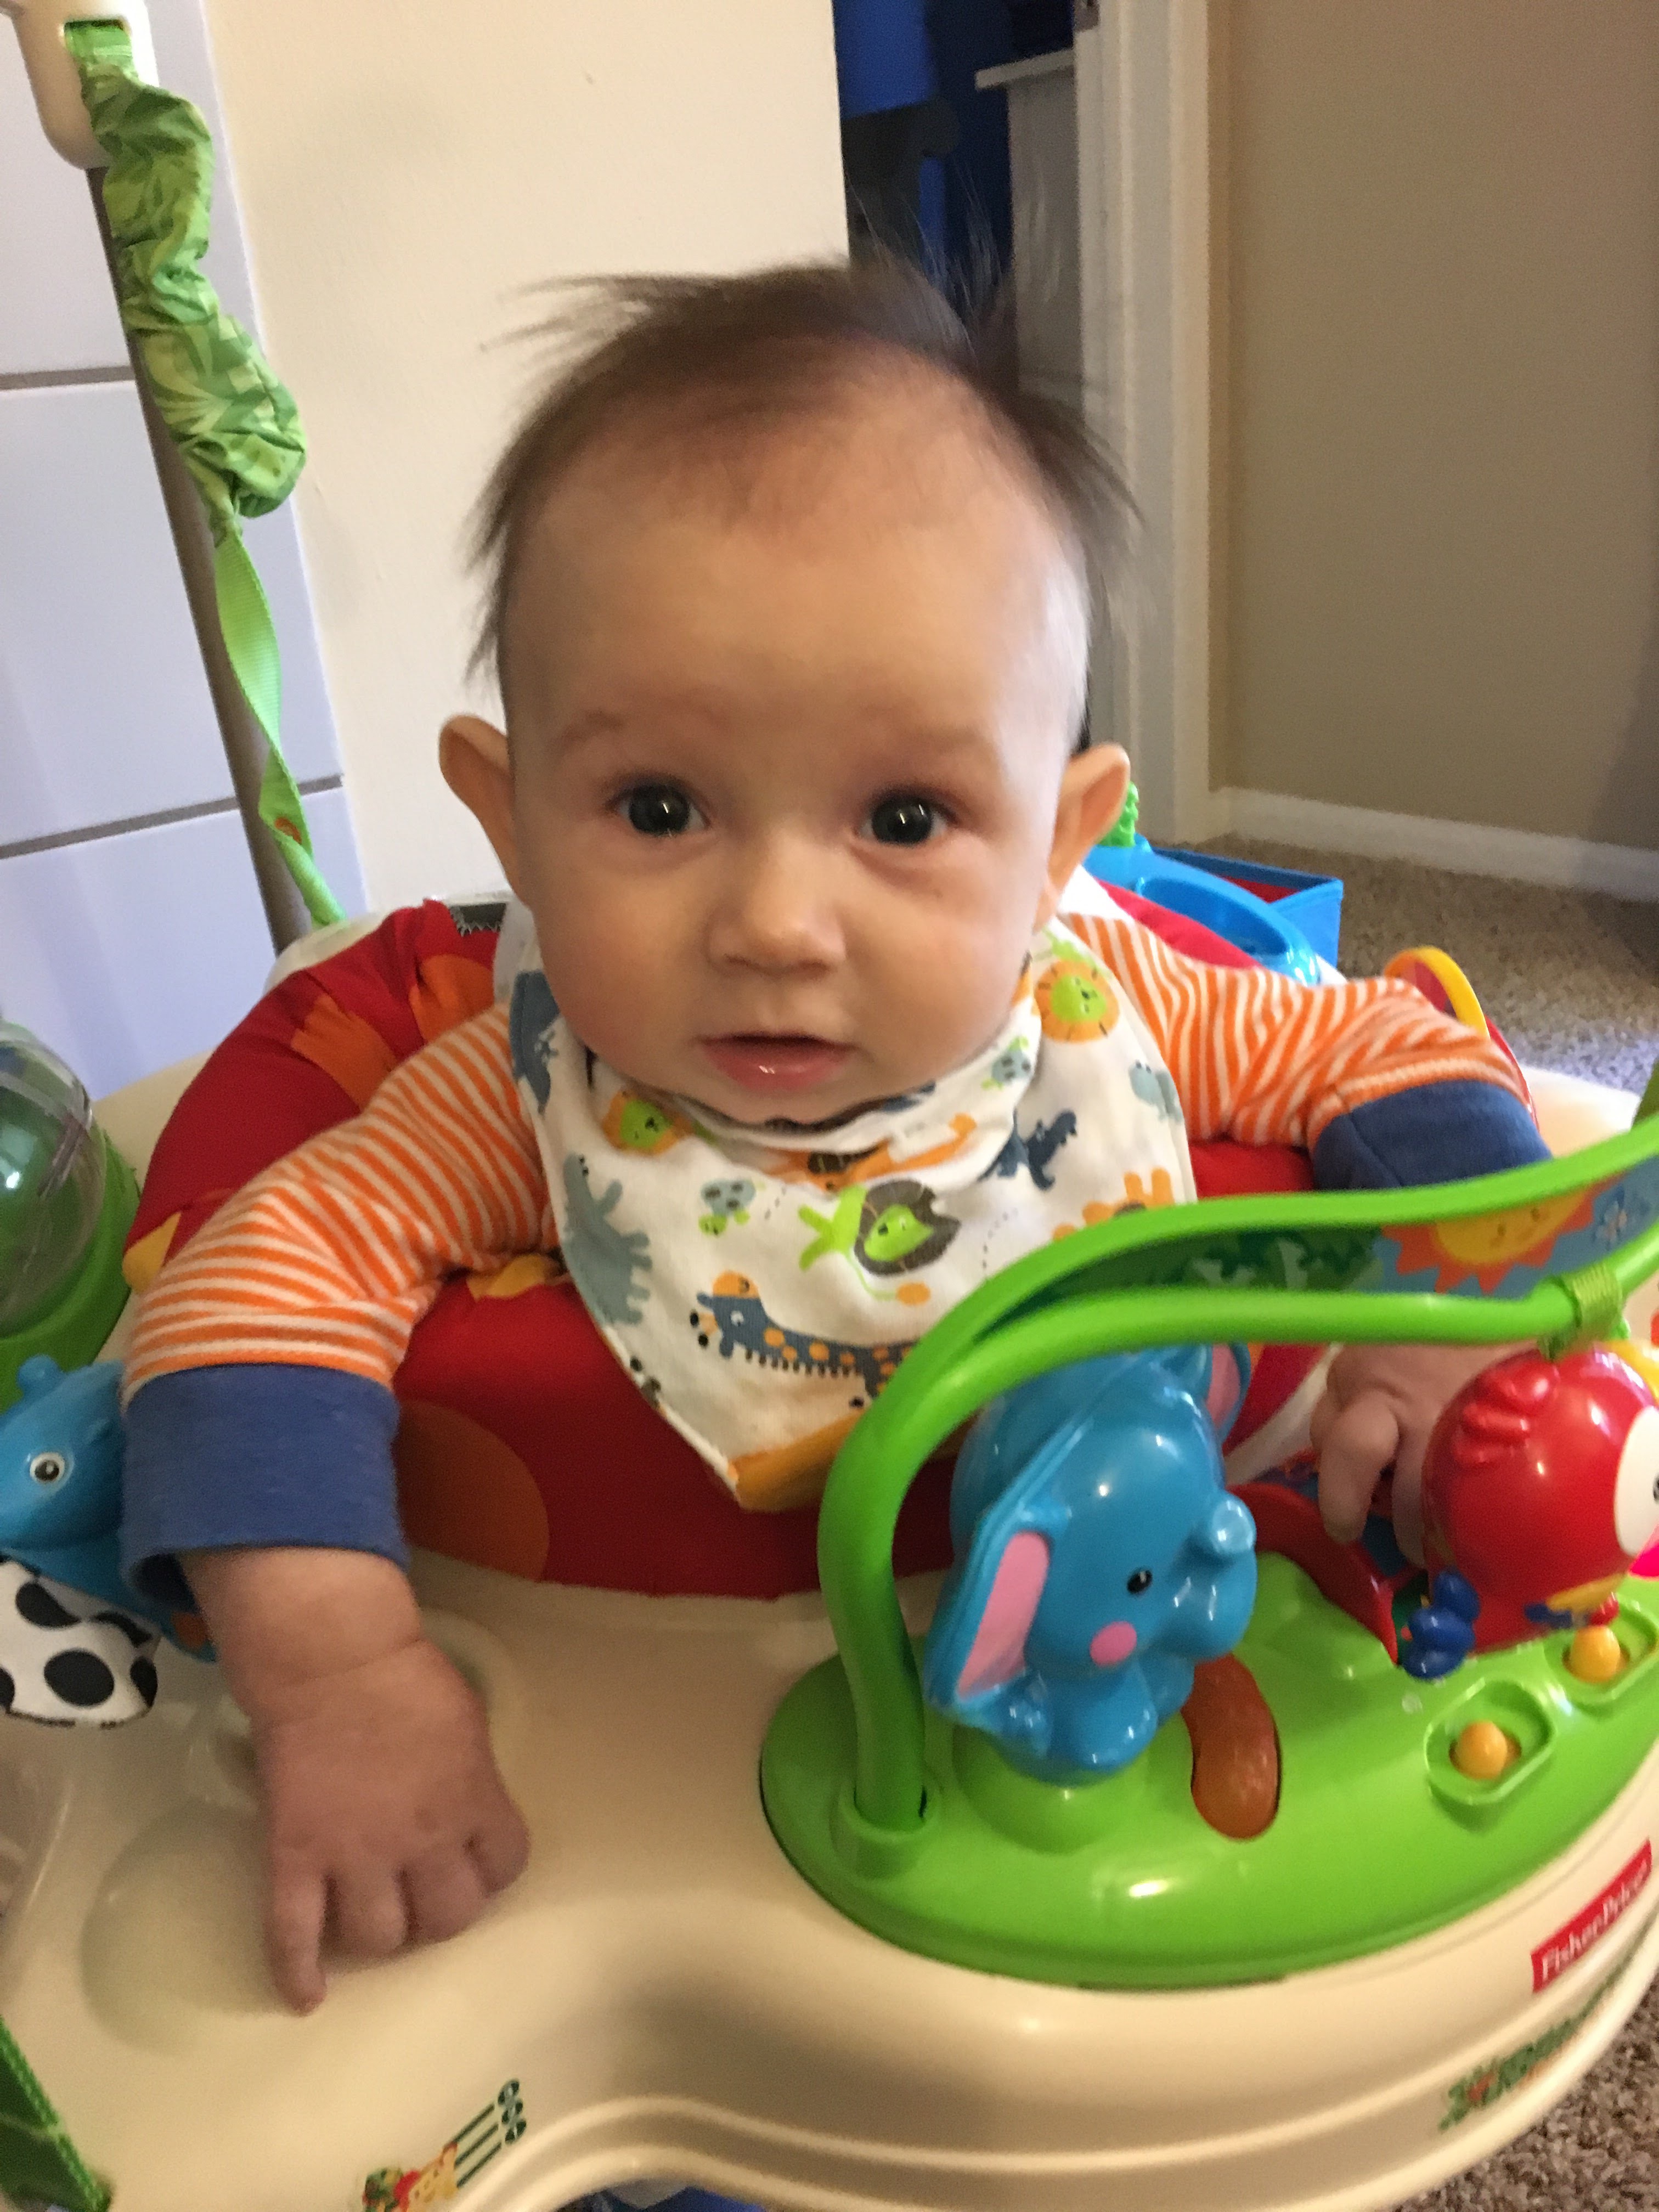 jumperoo for 3 month old